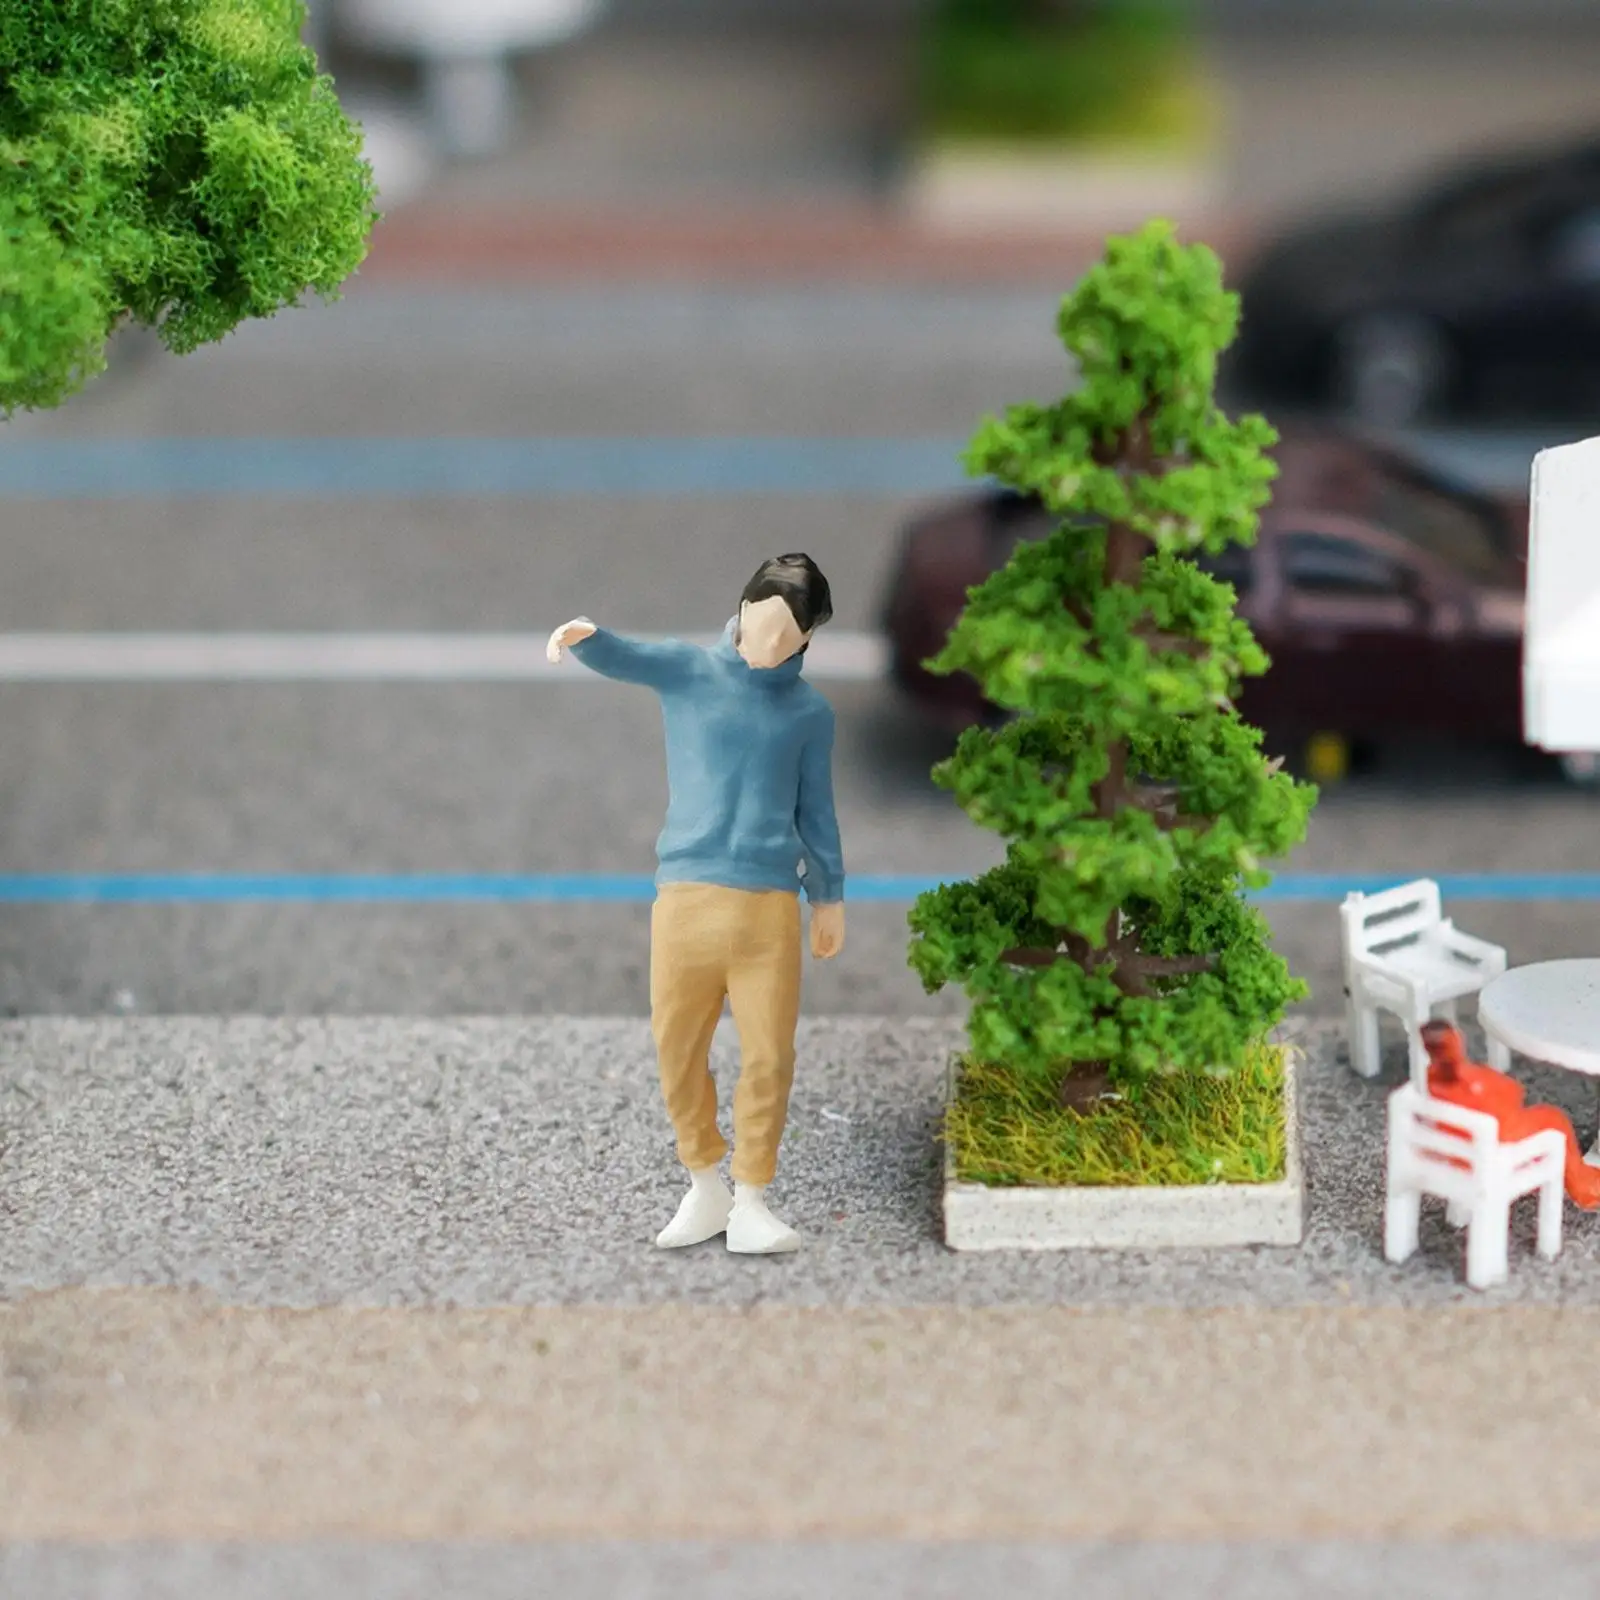 1/64 Resin Model Street Figure for Micro Landscapes Photography Props Decor